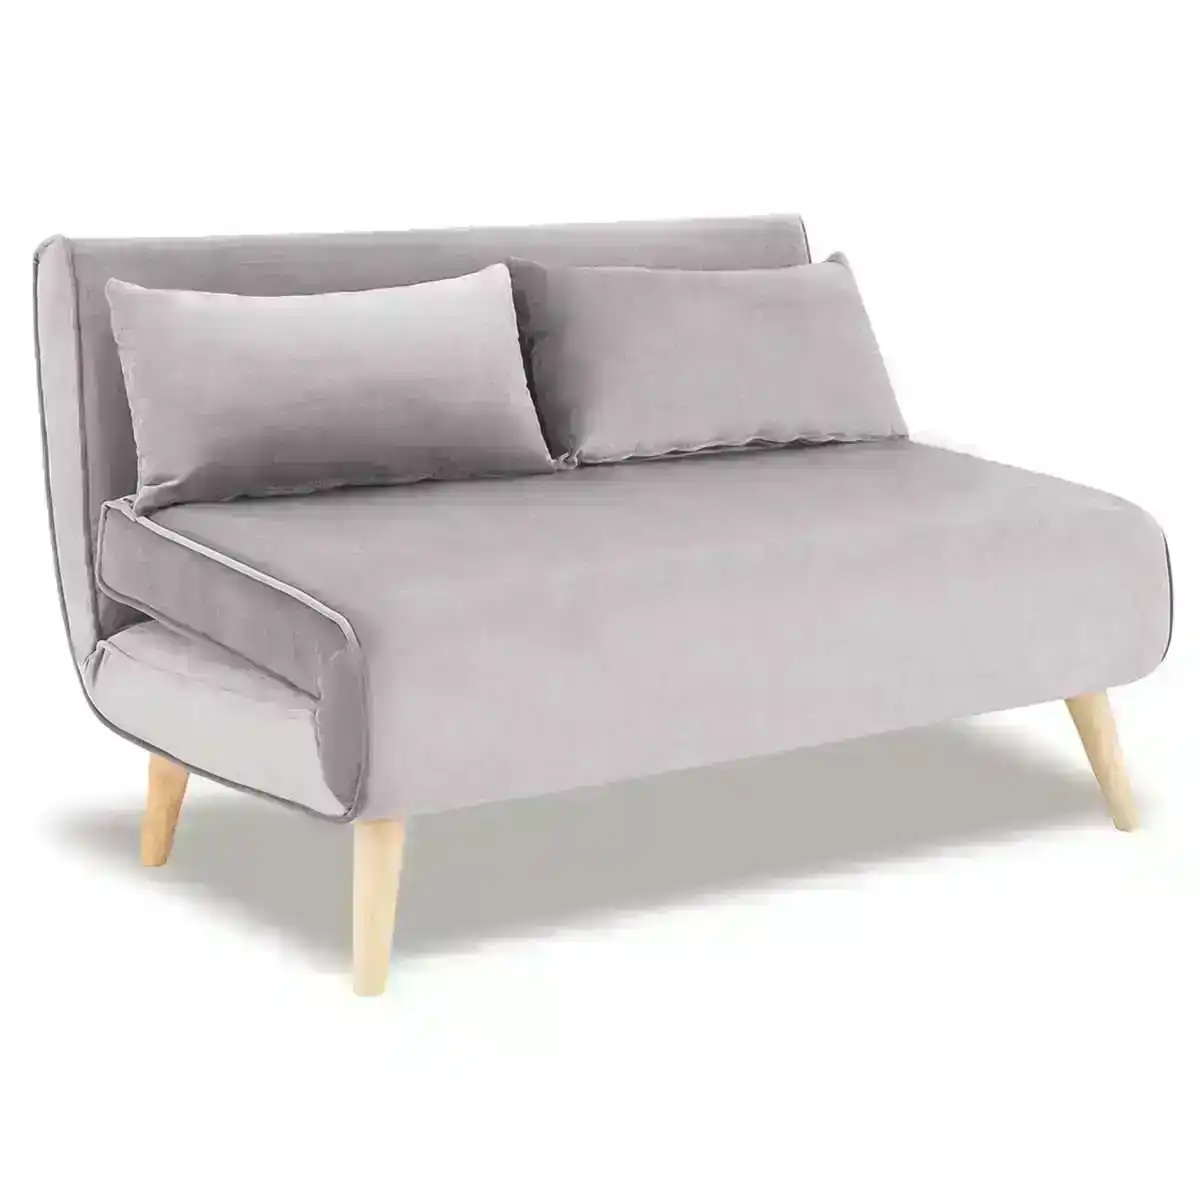 3 Seater Faux Velvet Sofa Bed Couch Furniture   Light Grey